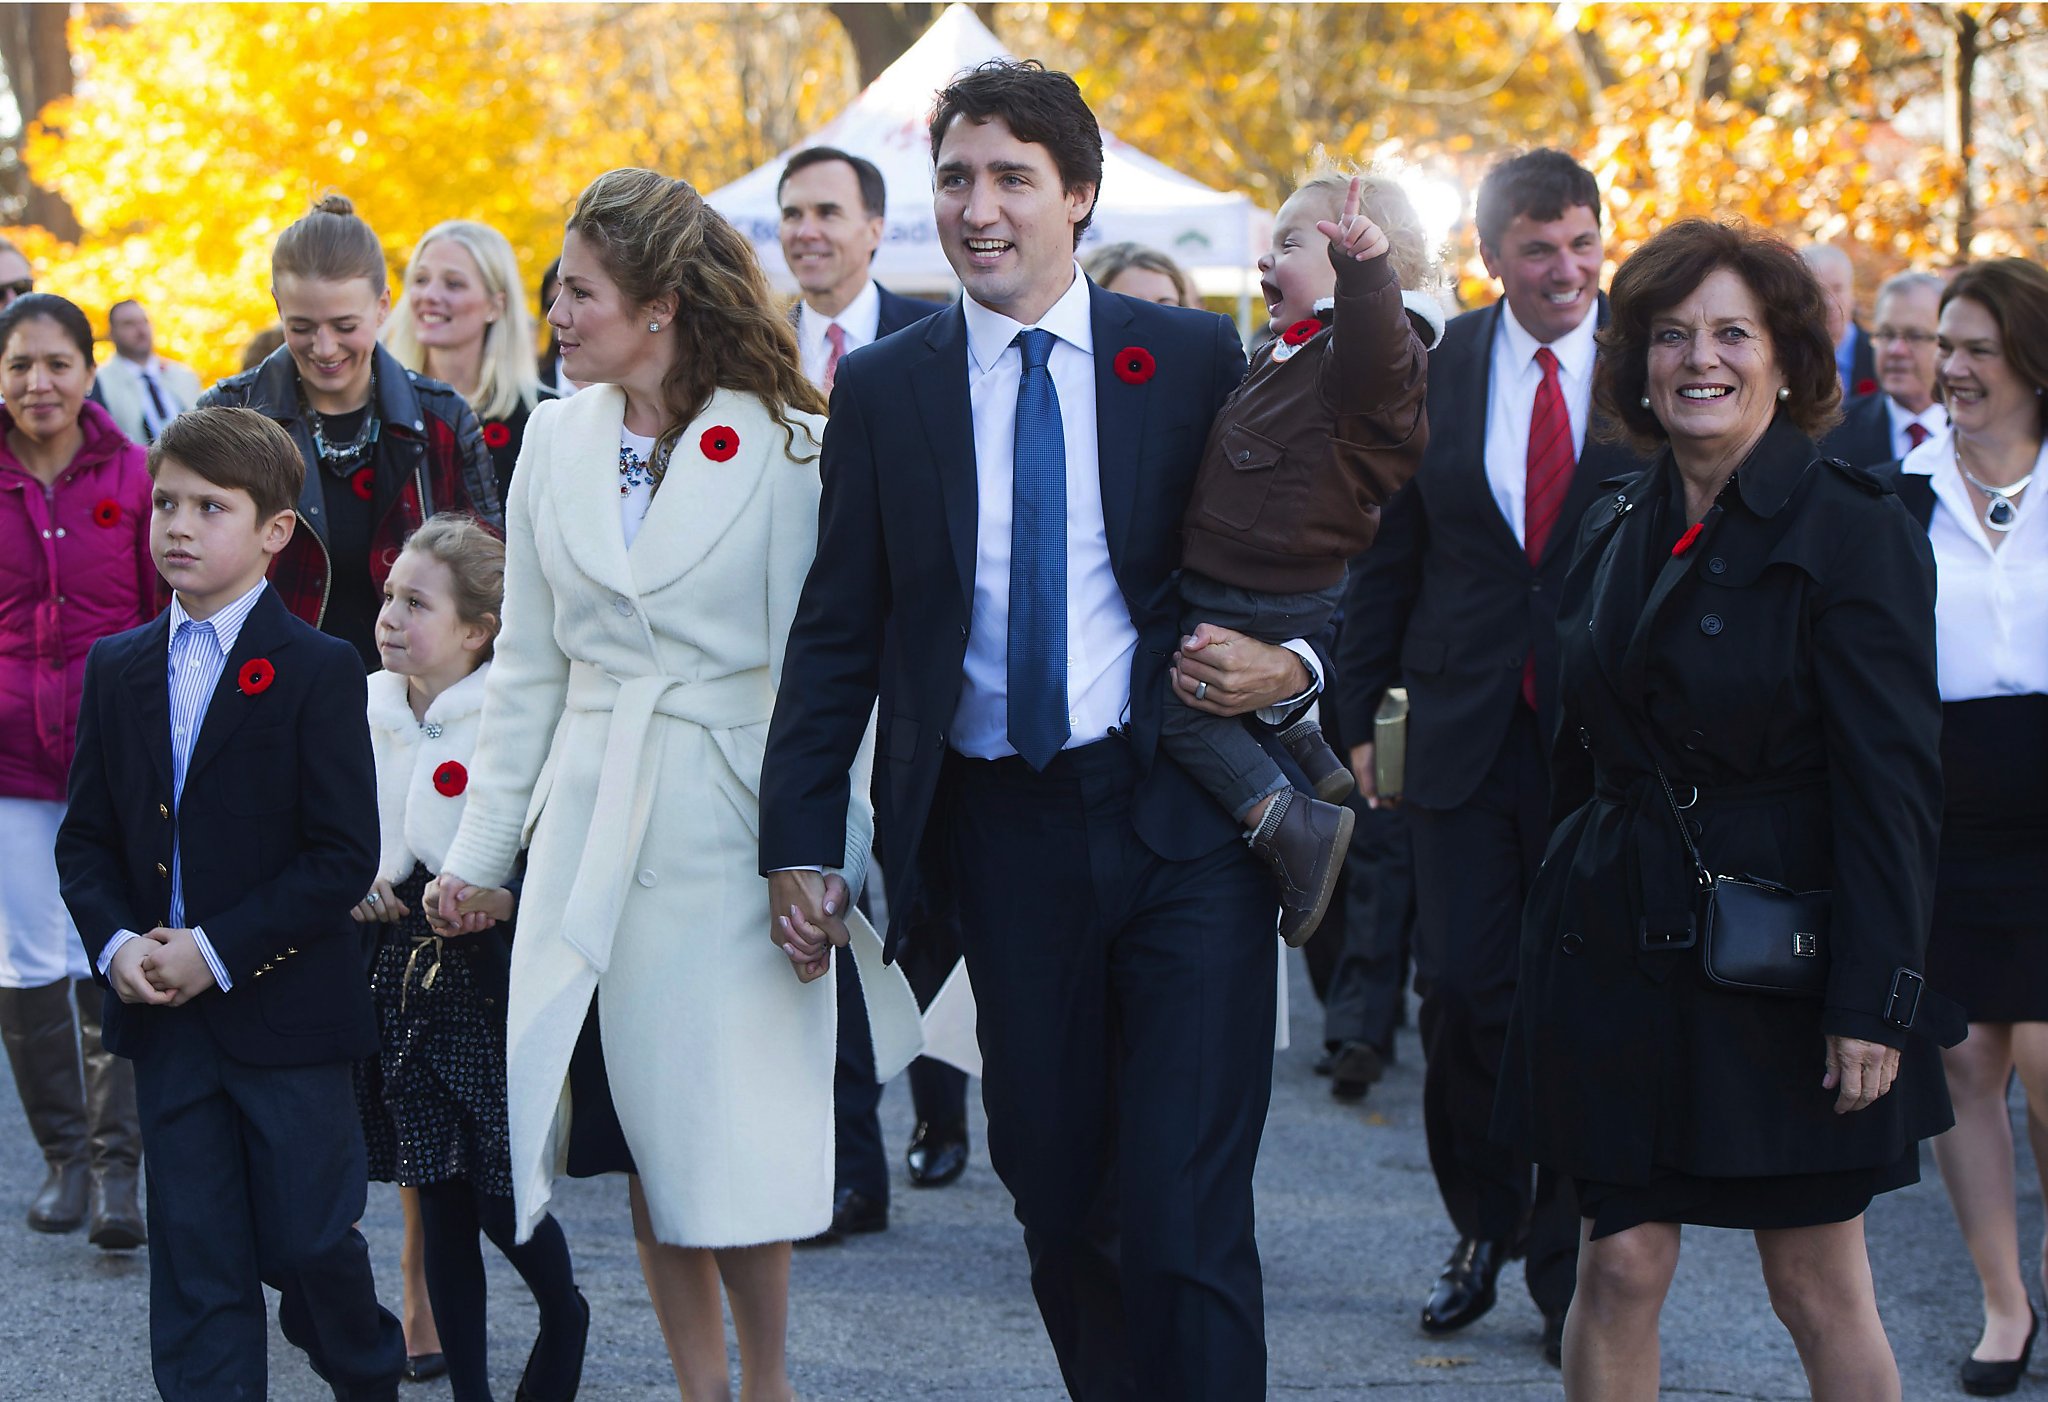 Canada's hunk-in-chief sworn in as new prime minister